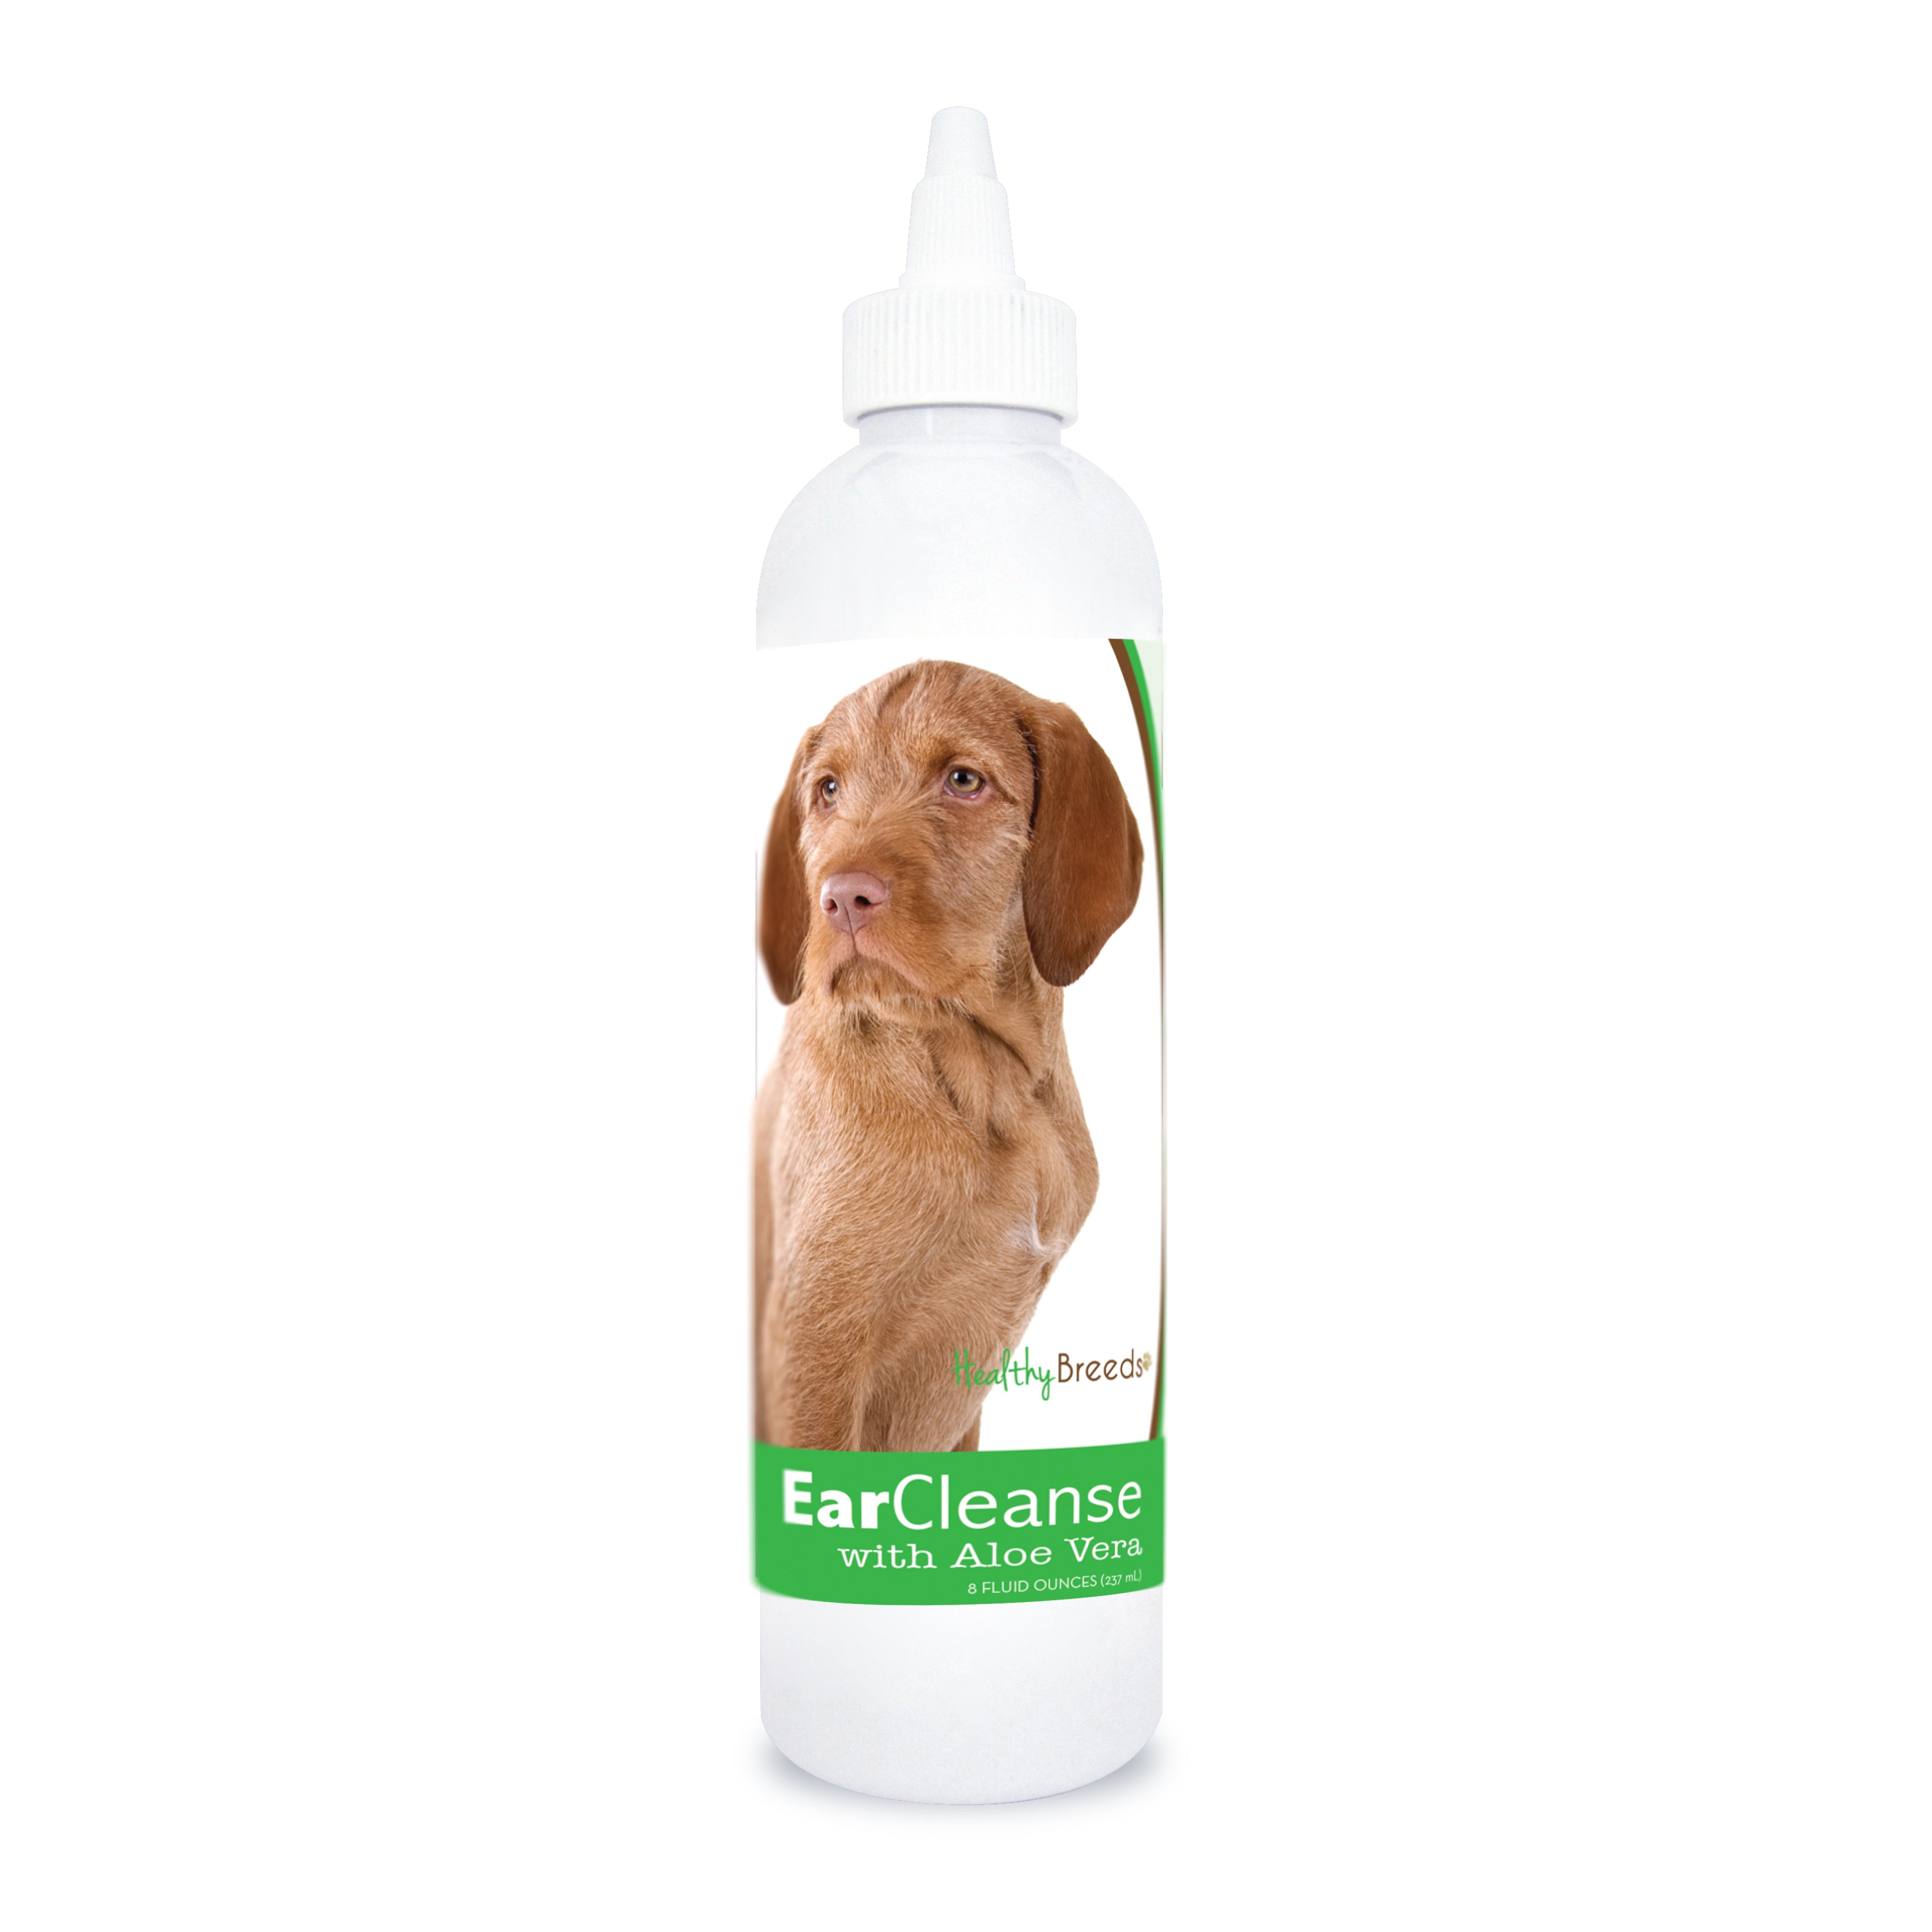 Wirehaired Vizsla Ear Cleanse with Aloe Vera Cucumber Melon 8 oz